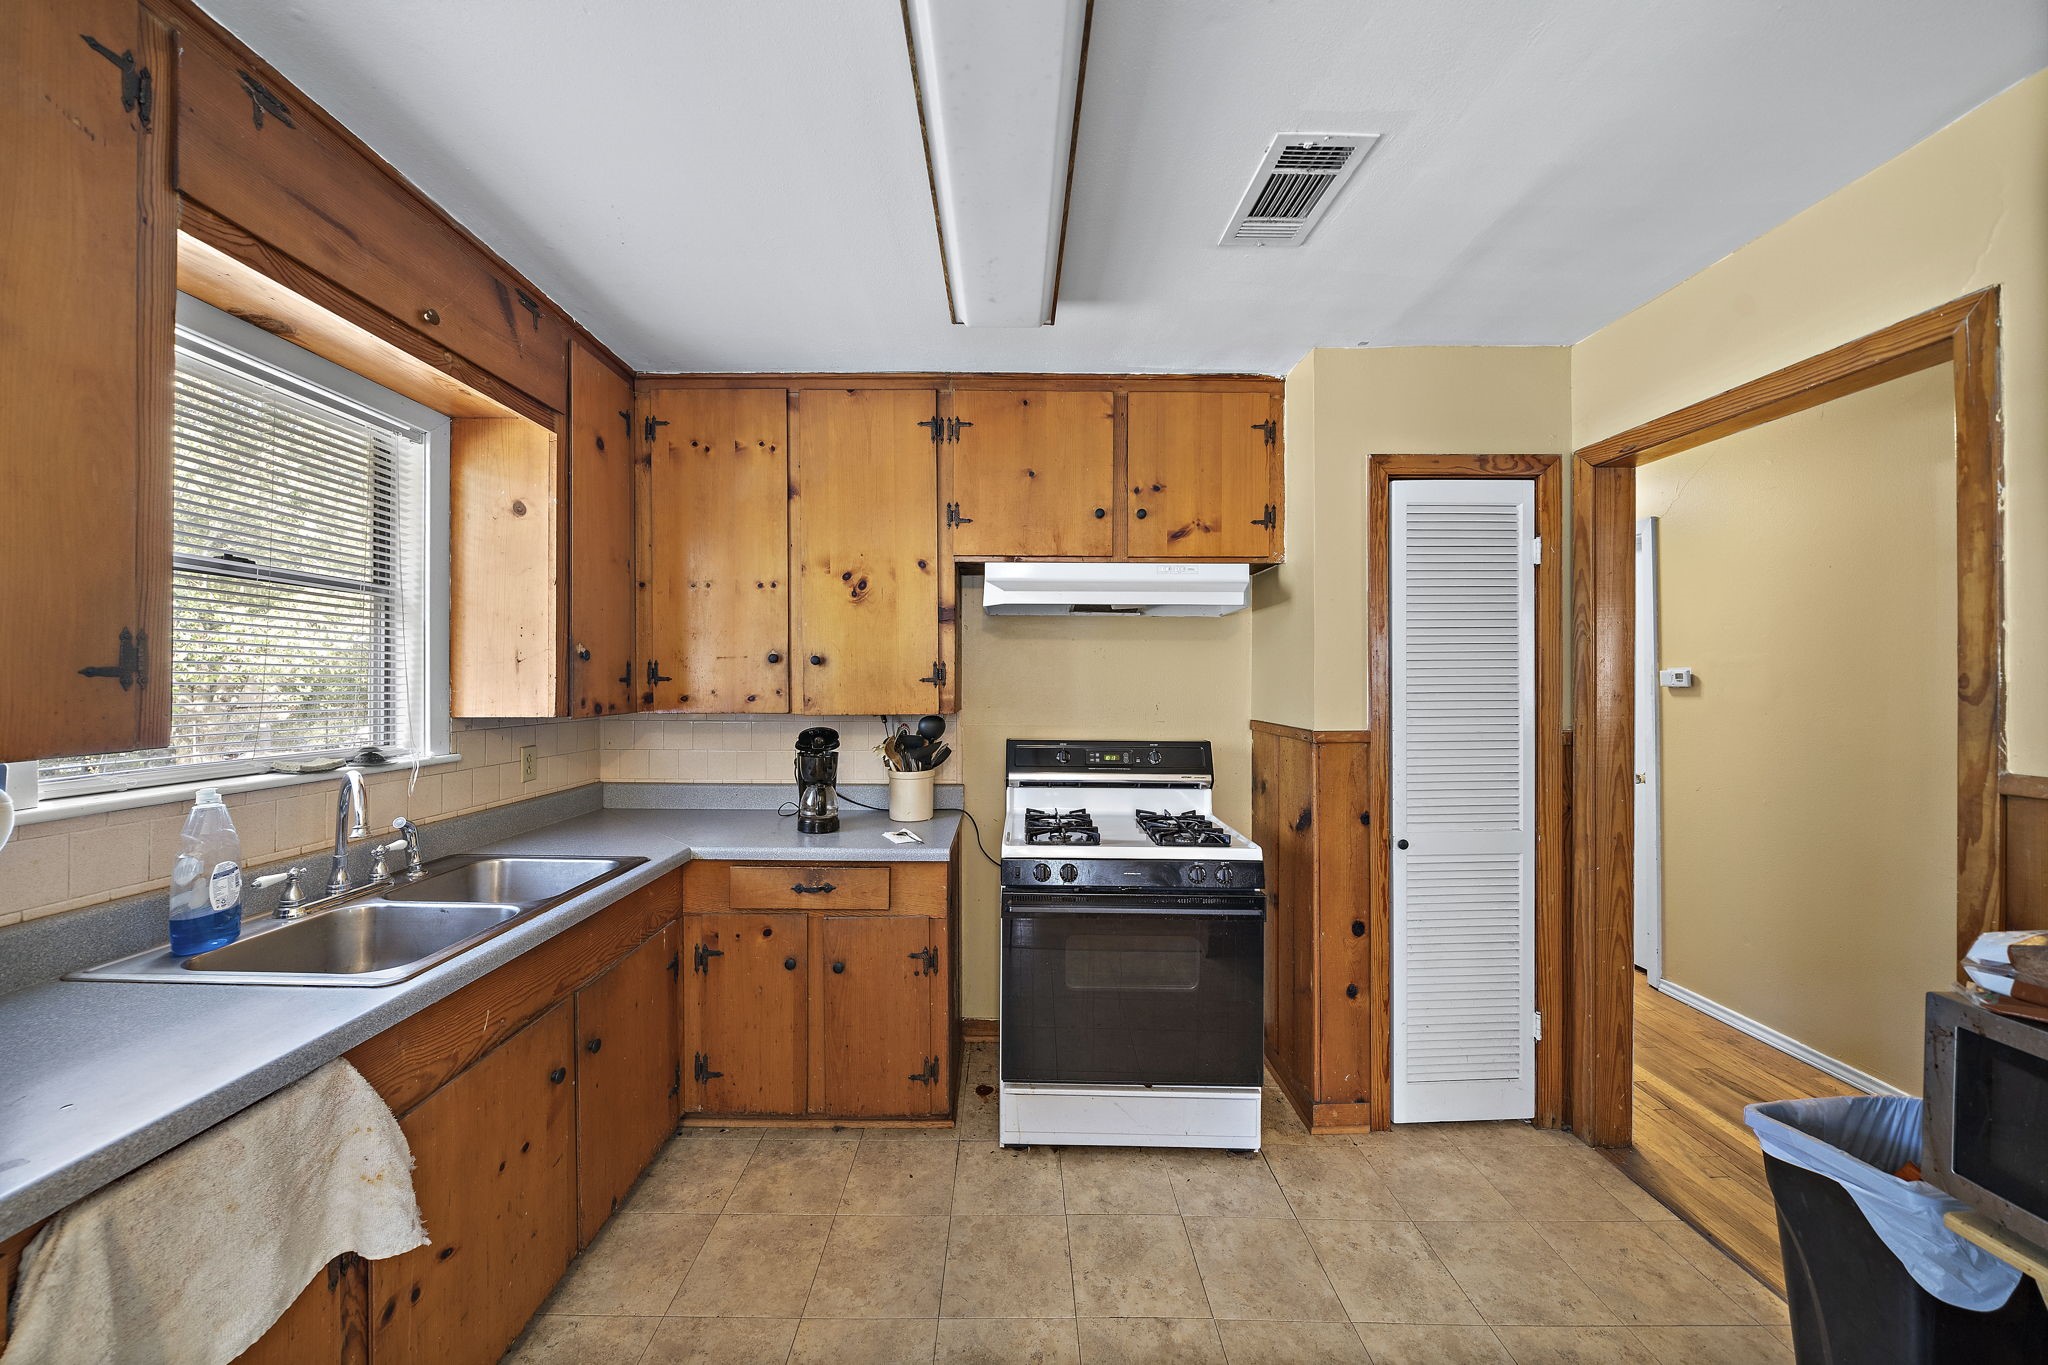 Secondary Home Kitchen